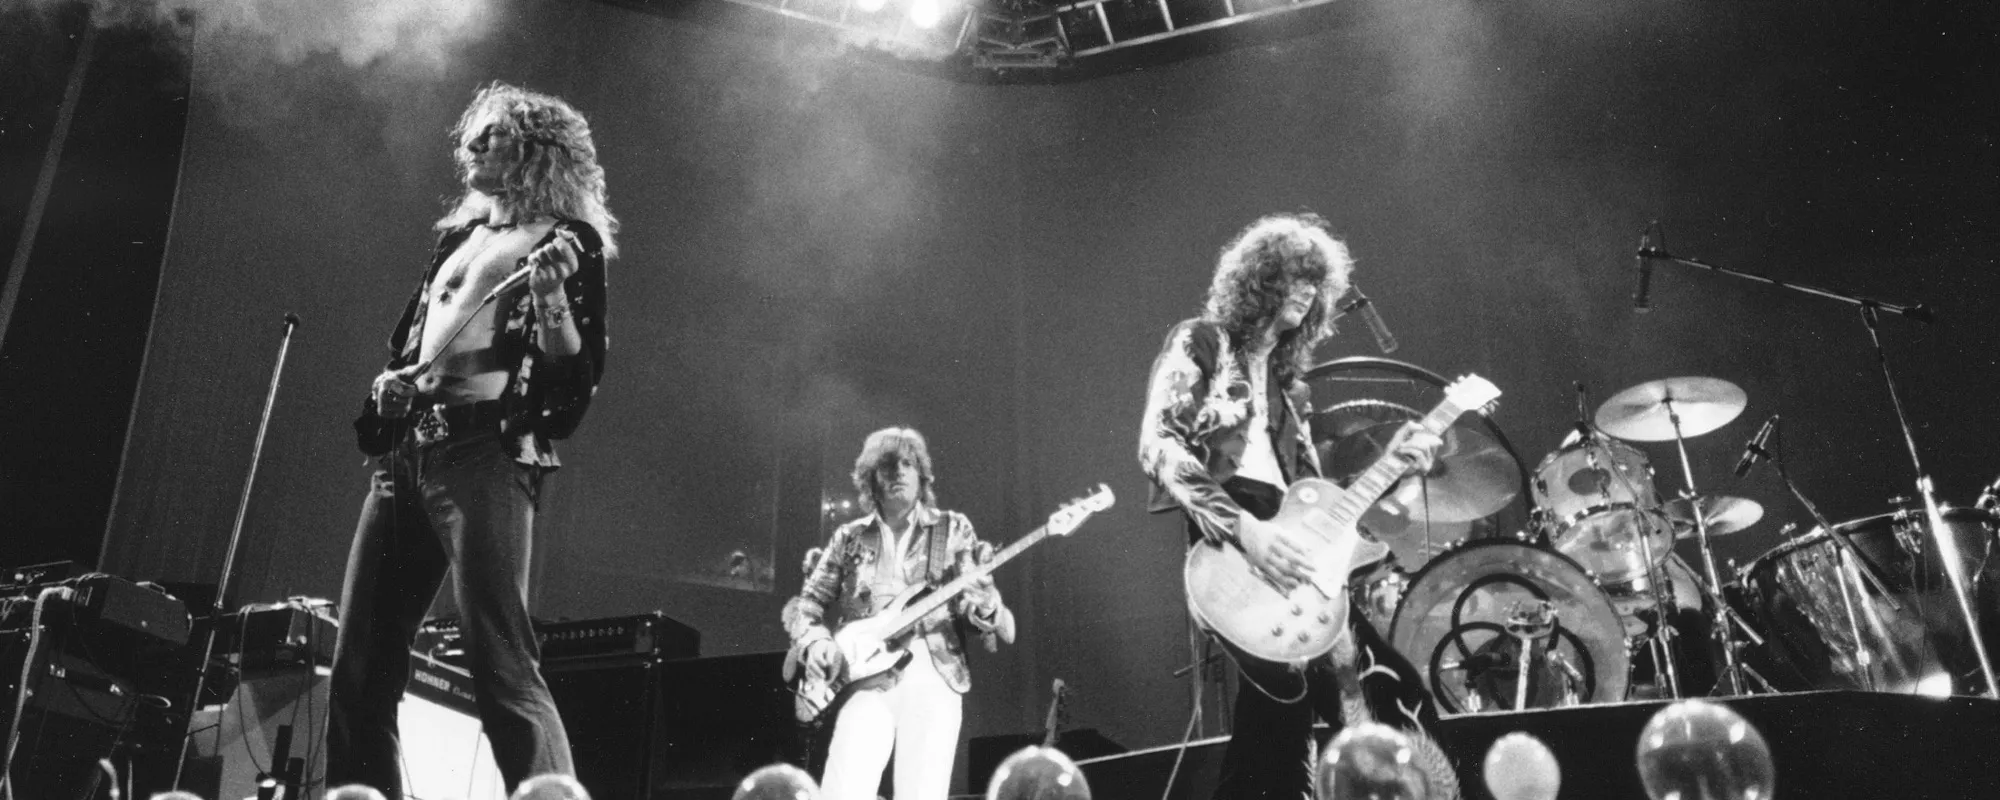 7 Rock Albums for Guitar Fans of the 1970s that Everyone Should Own